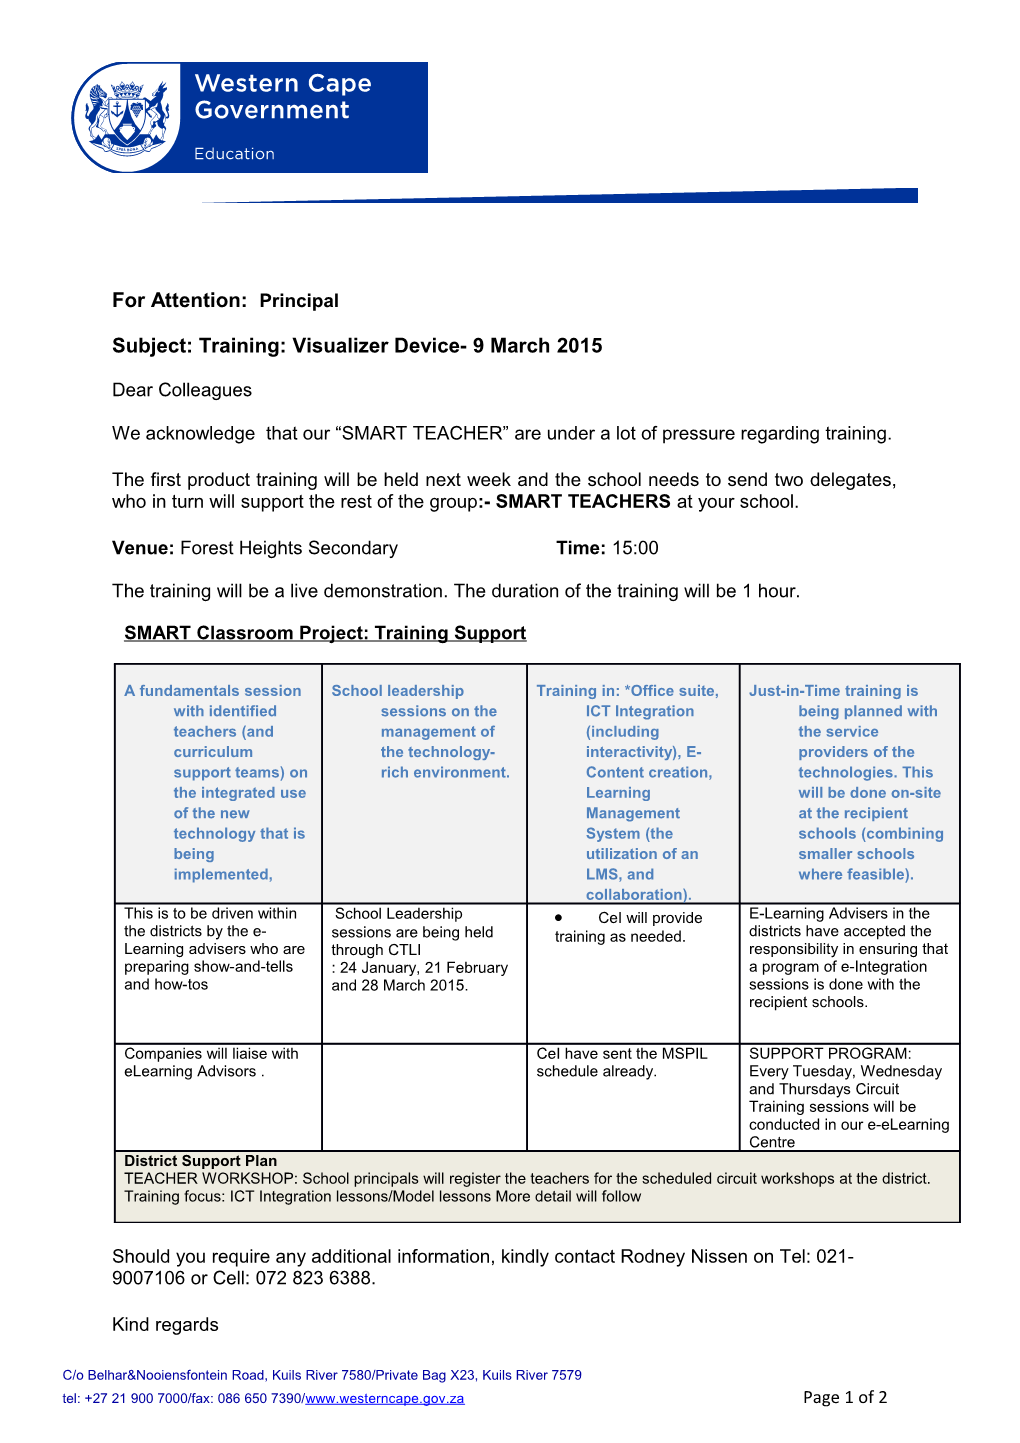 Subject: Training: Visualizer Device- 9 March 2015